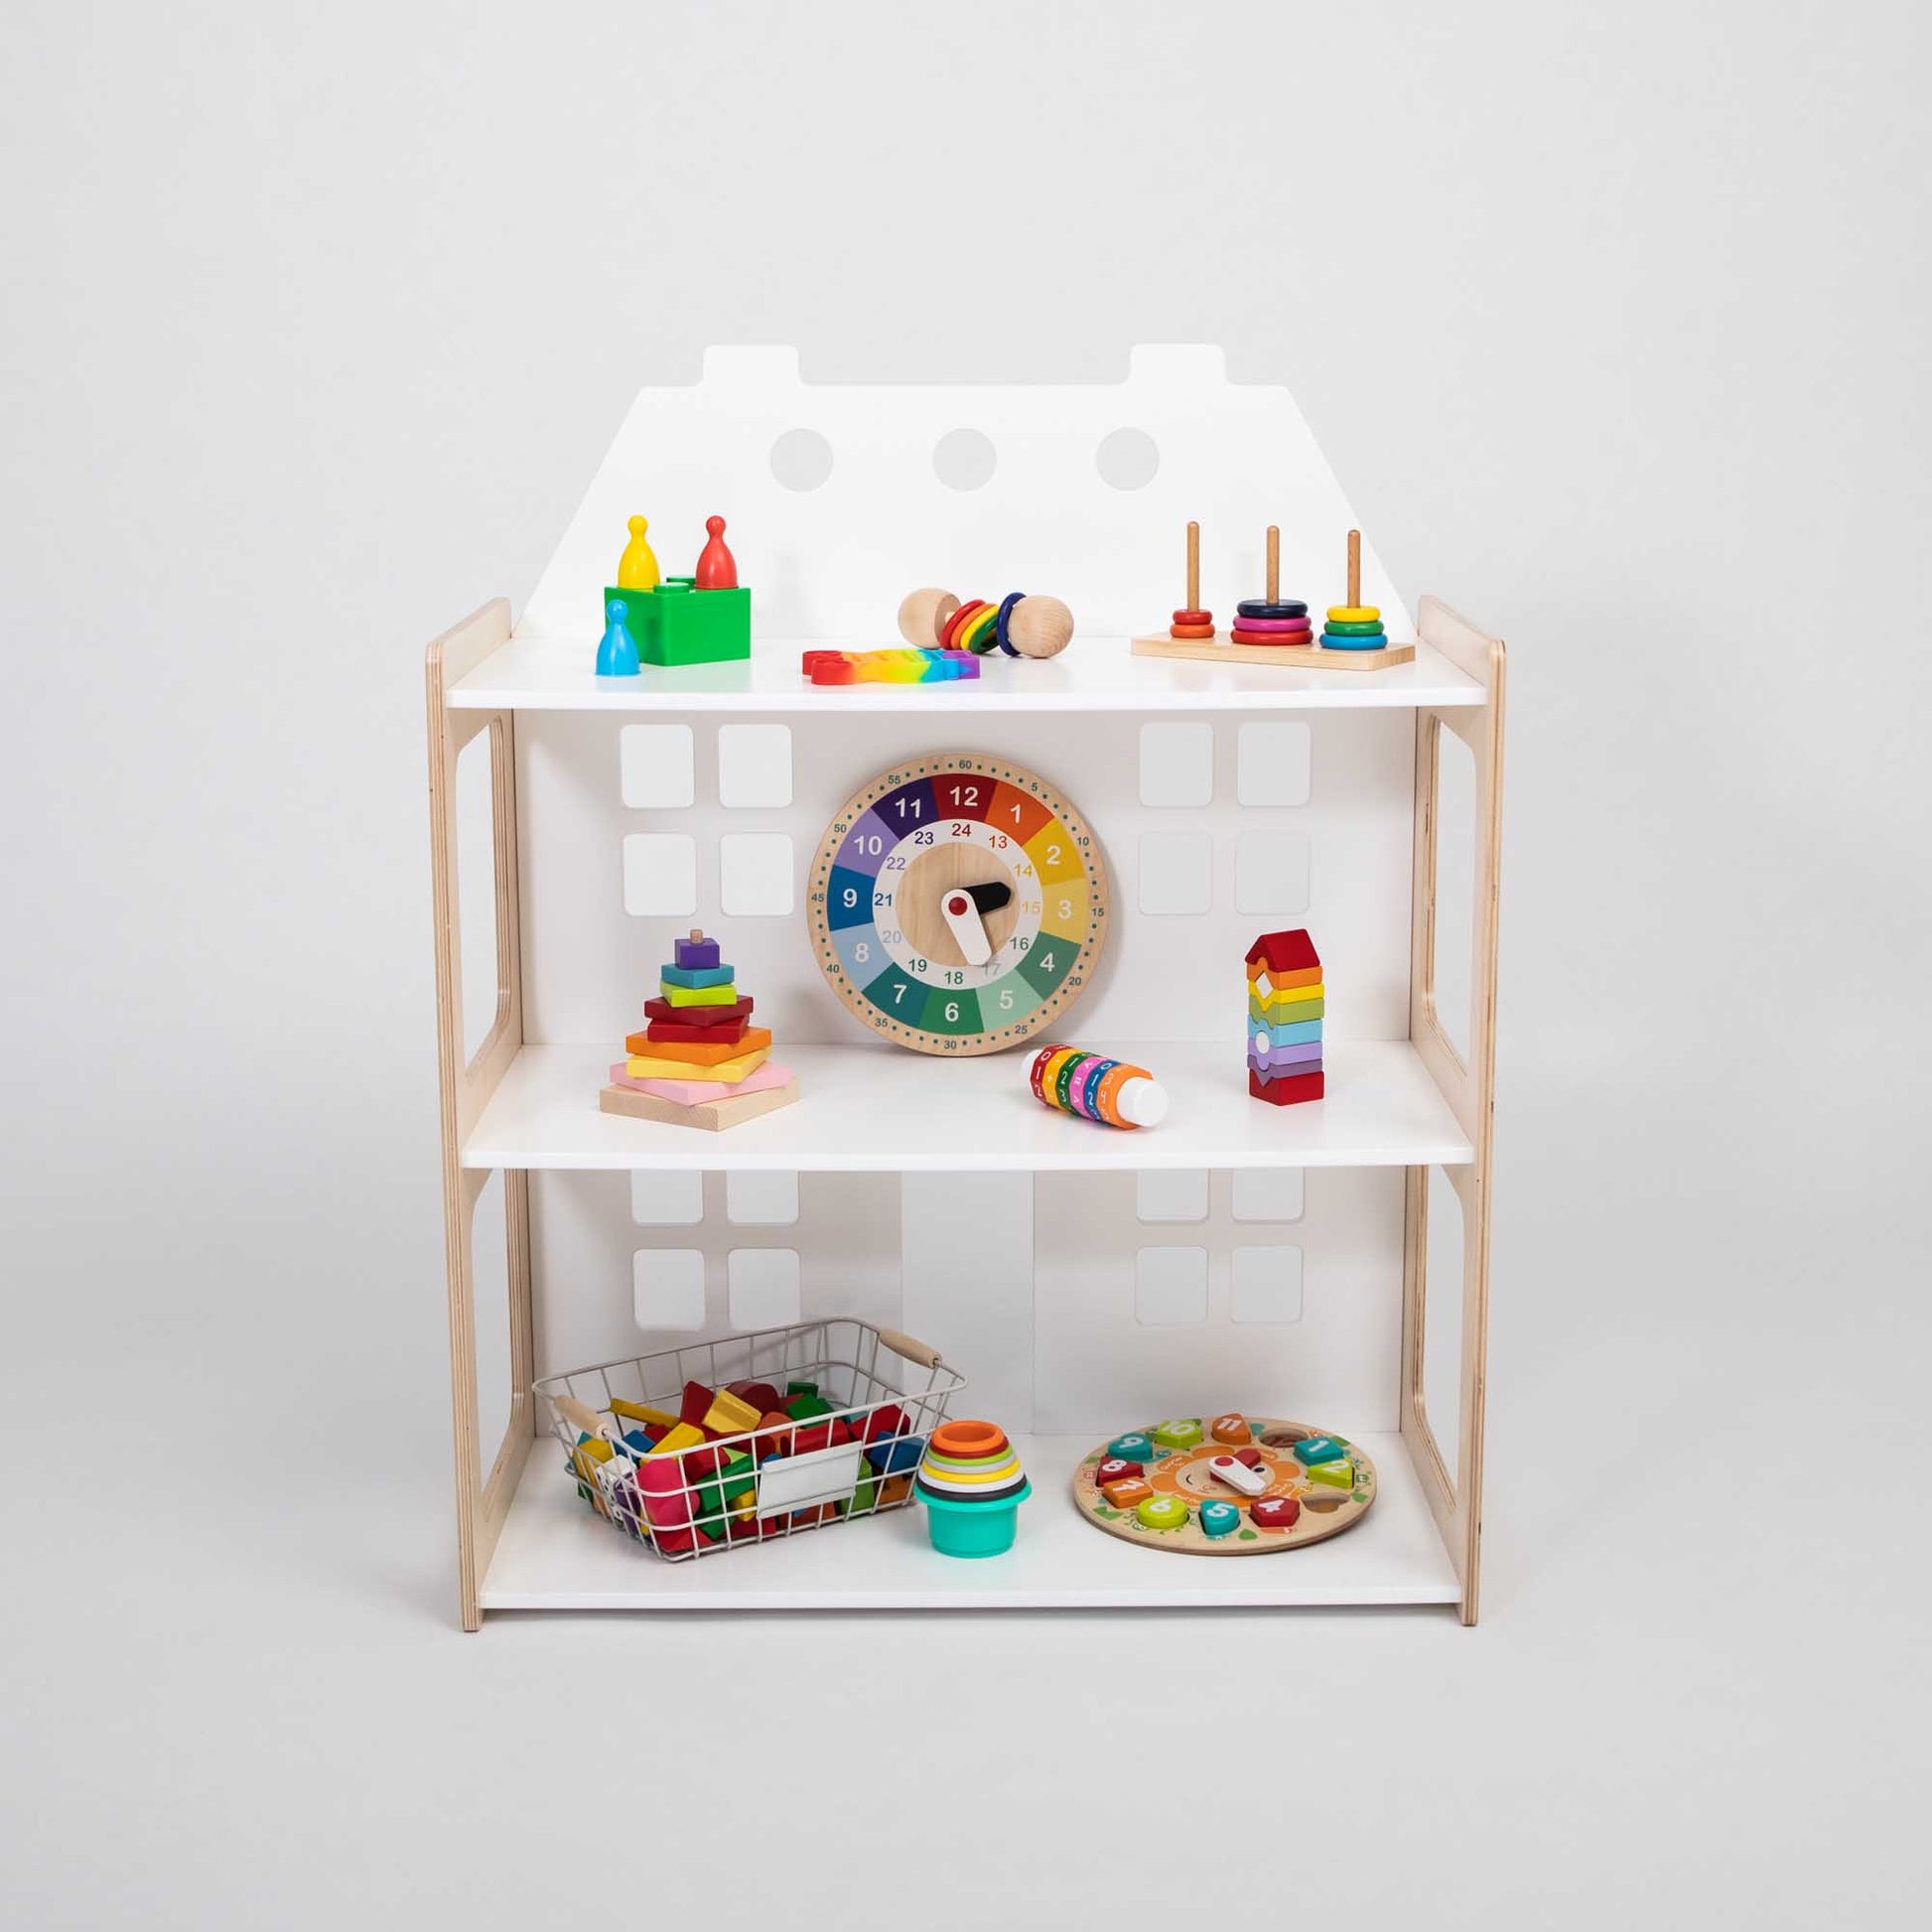 A Sweet Home From Wood Montessori toy shelf with a 2-in-1 doll house and toys.